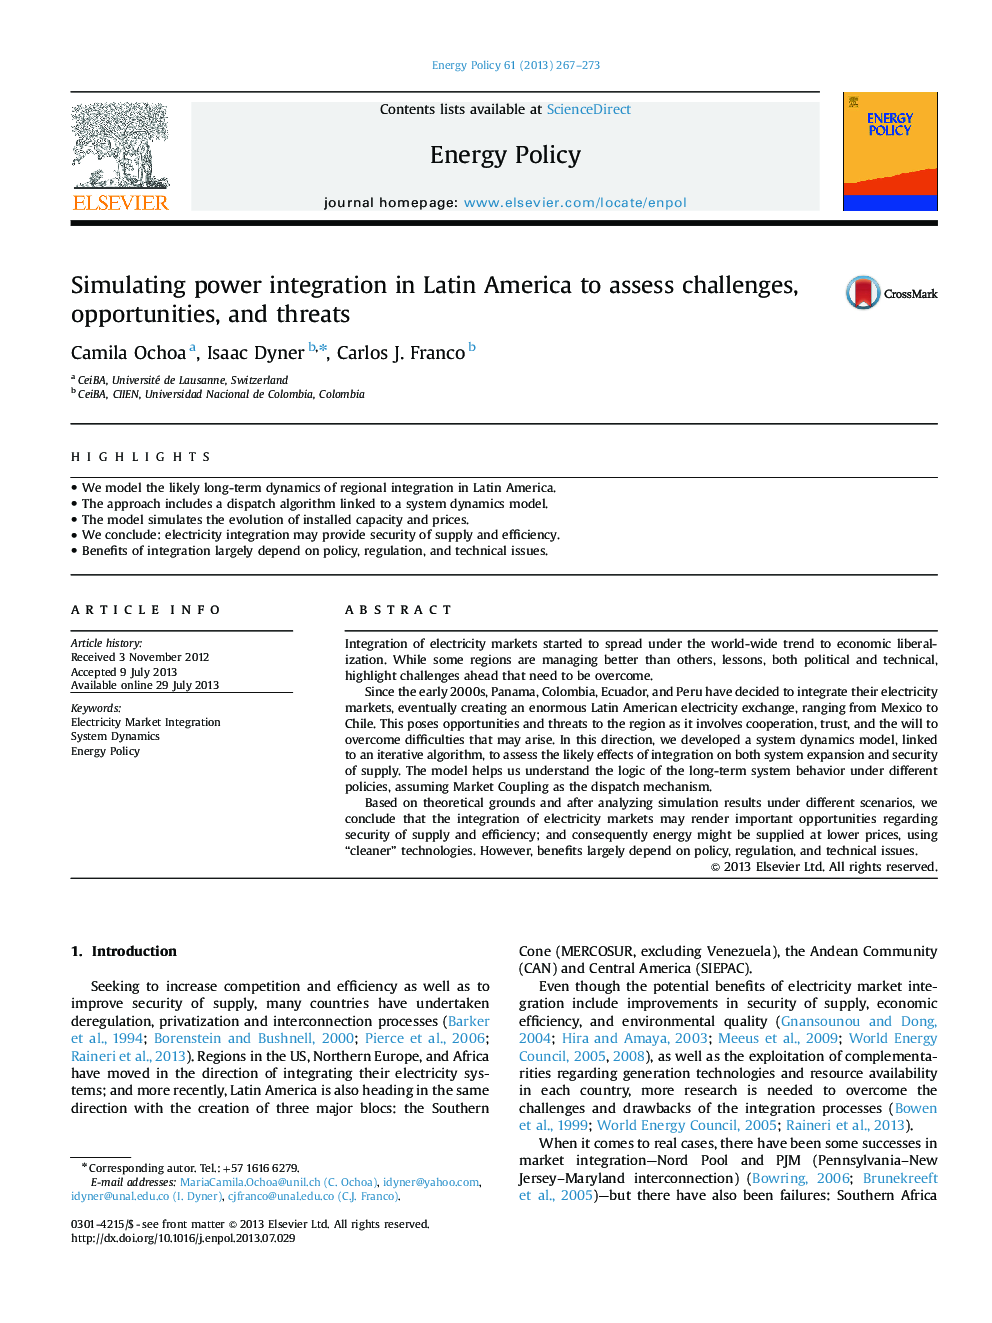 Simulating power integration in Latin America to assess challenges, opportunities, and threats